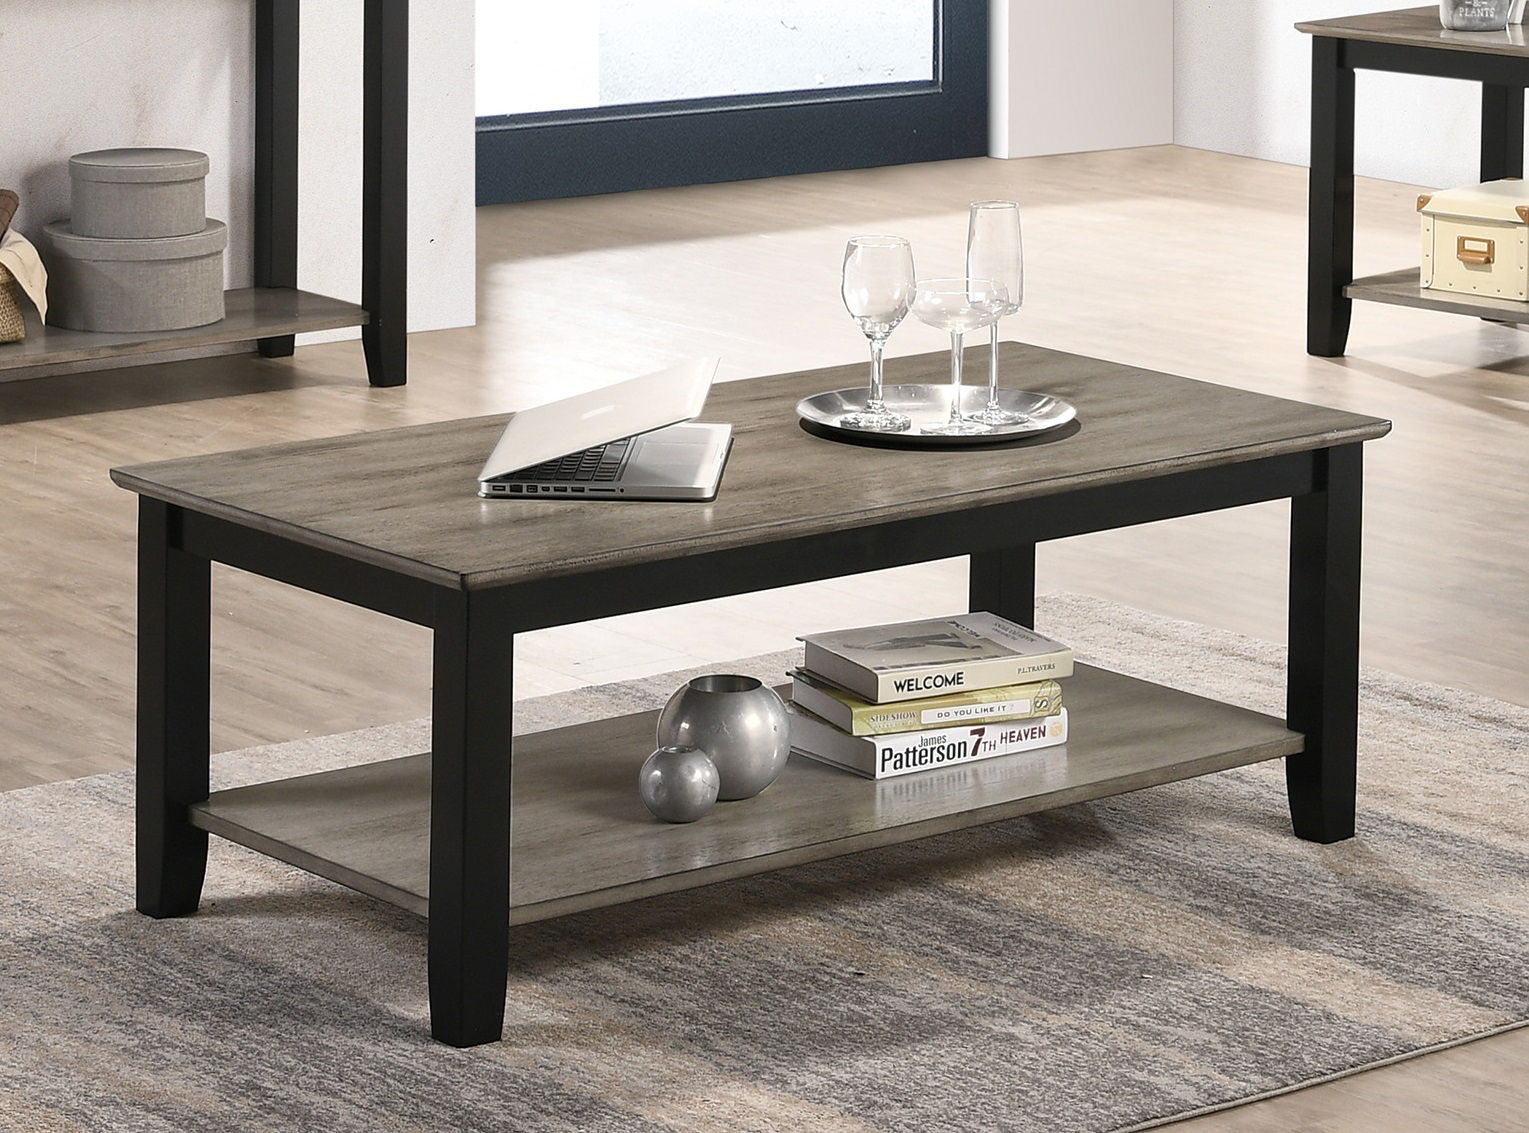 Coffee Table With Open Shelf In Dark Brown And Gray